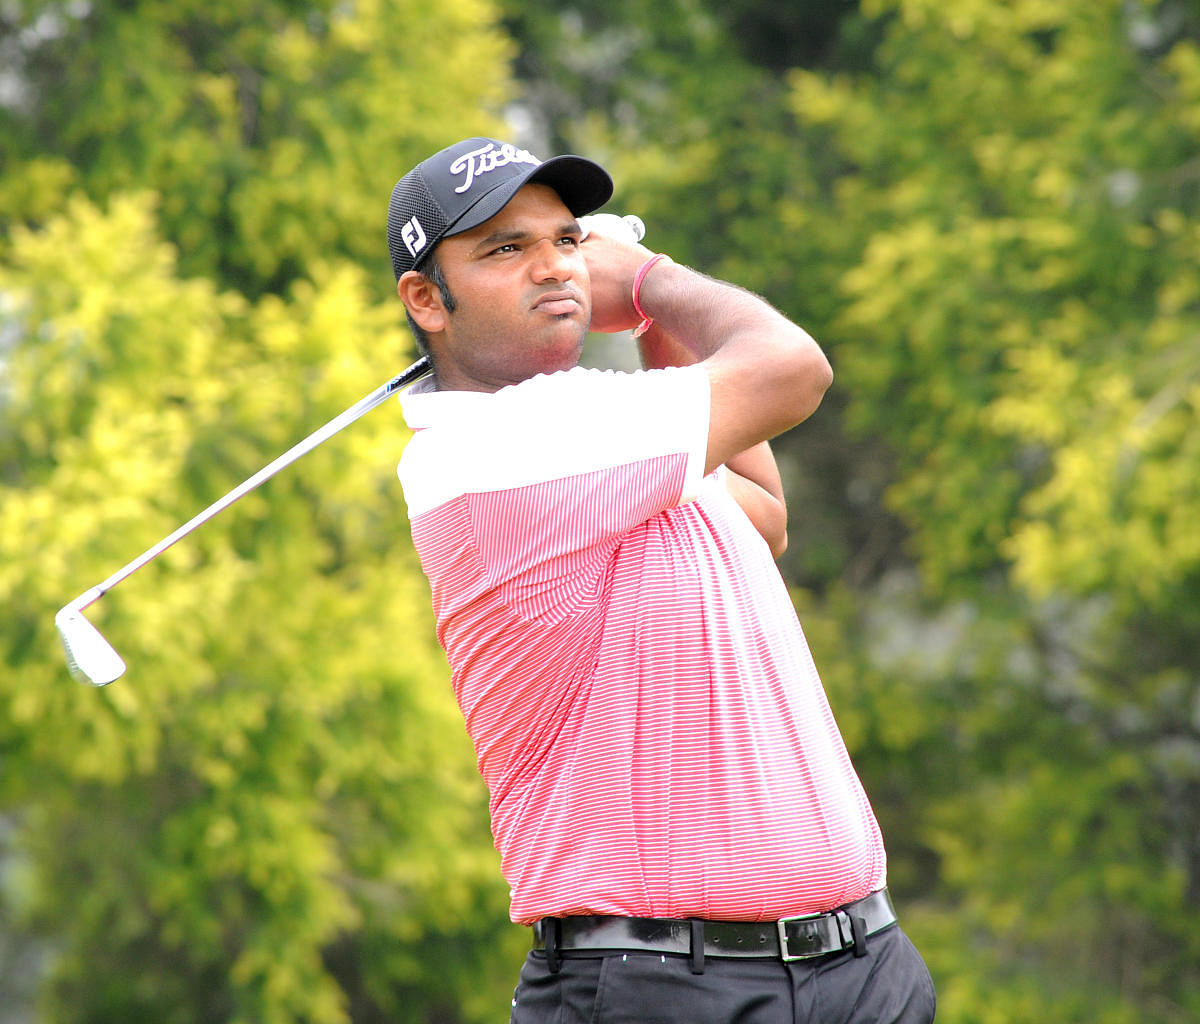 STEADY GOING Udayan Mane tees off during the third round of the Bengaluru Open at KGA on Friday. DH Photo/ Srikanta Sharma R